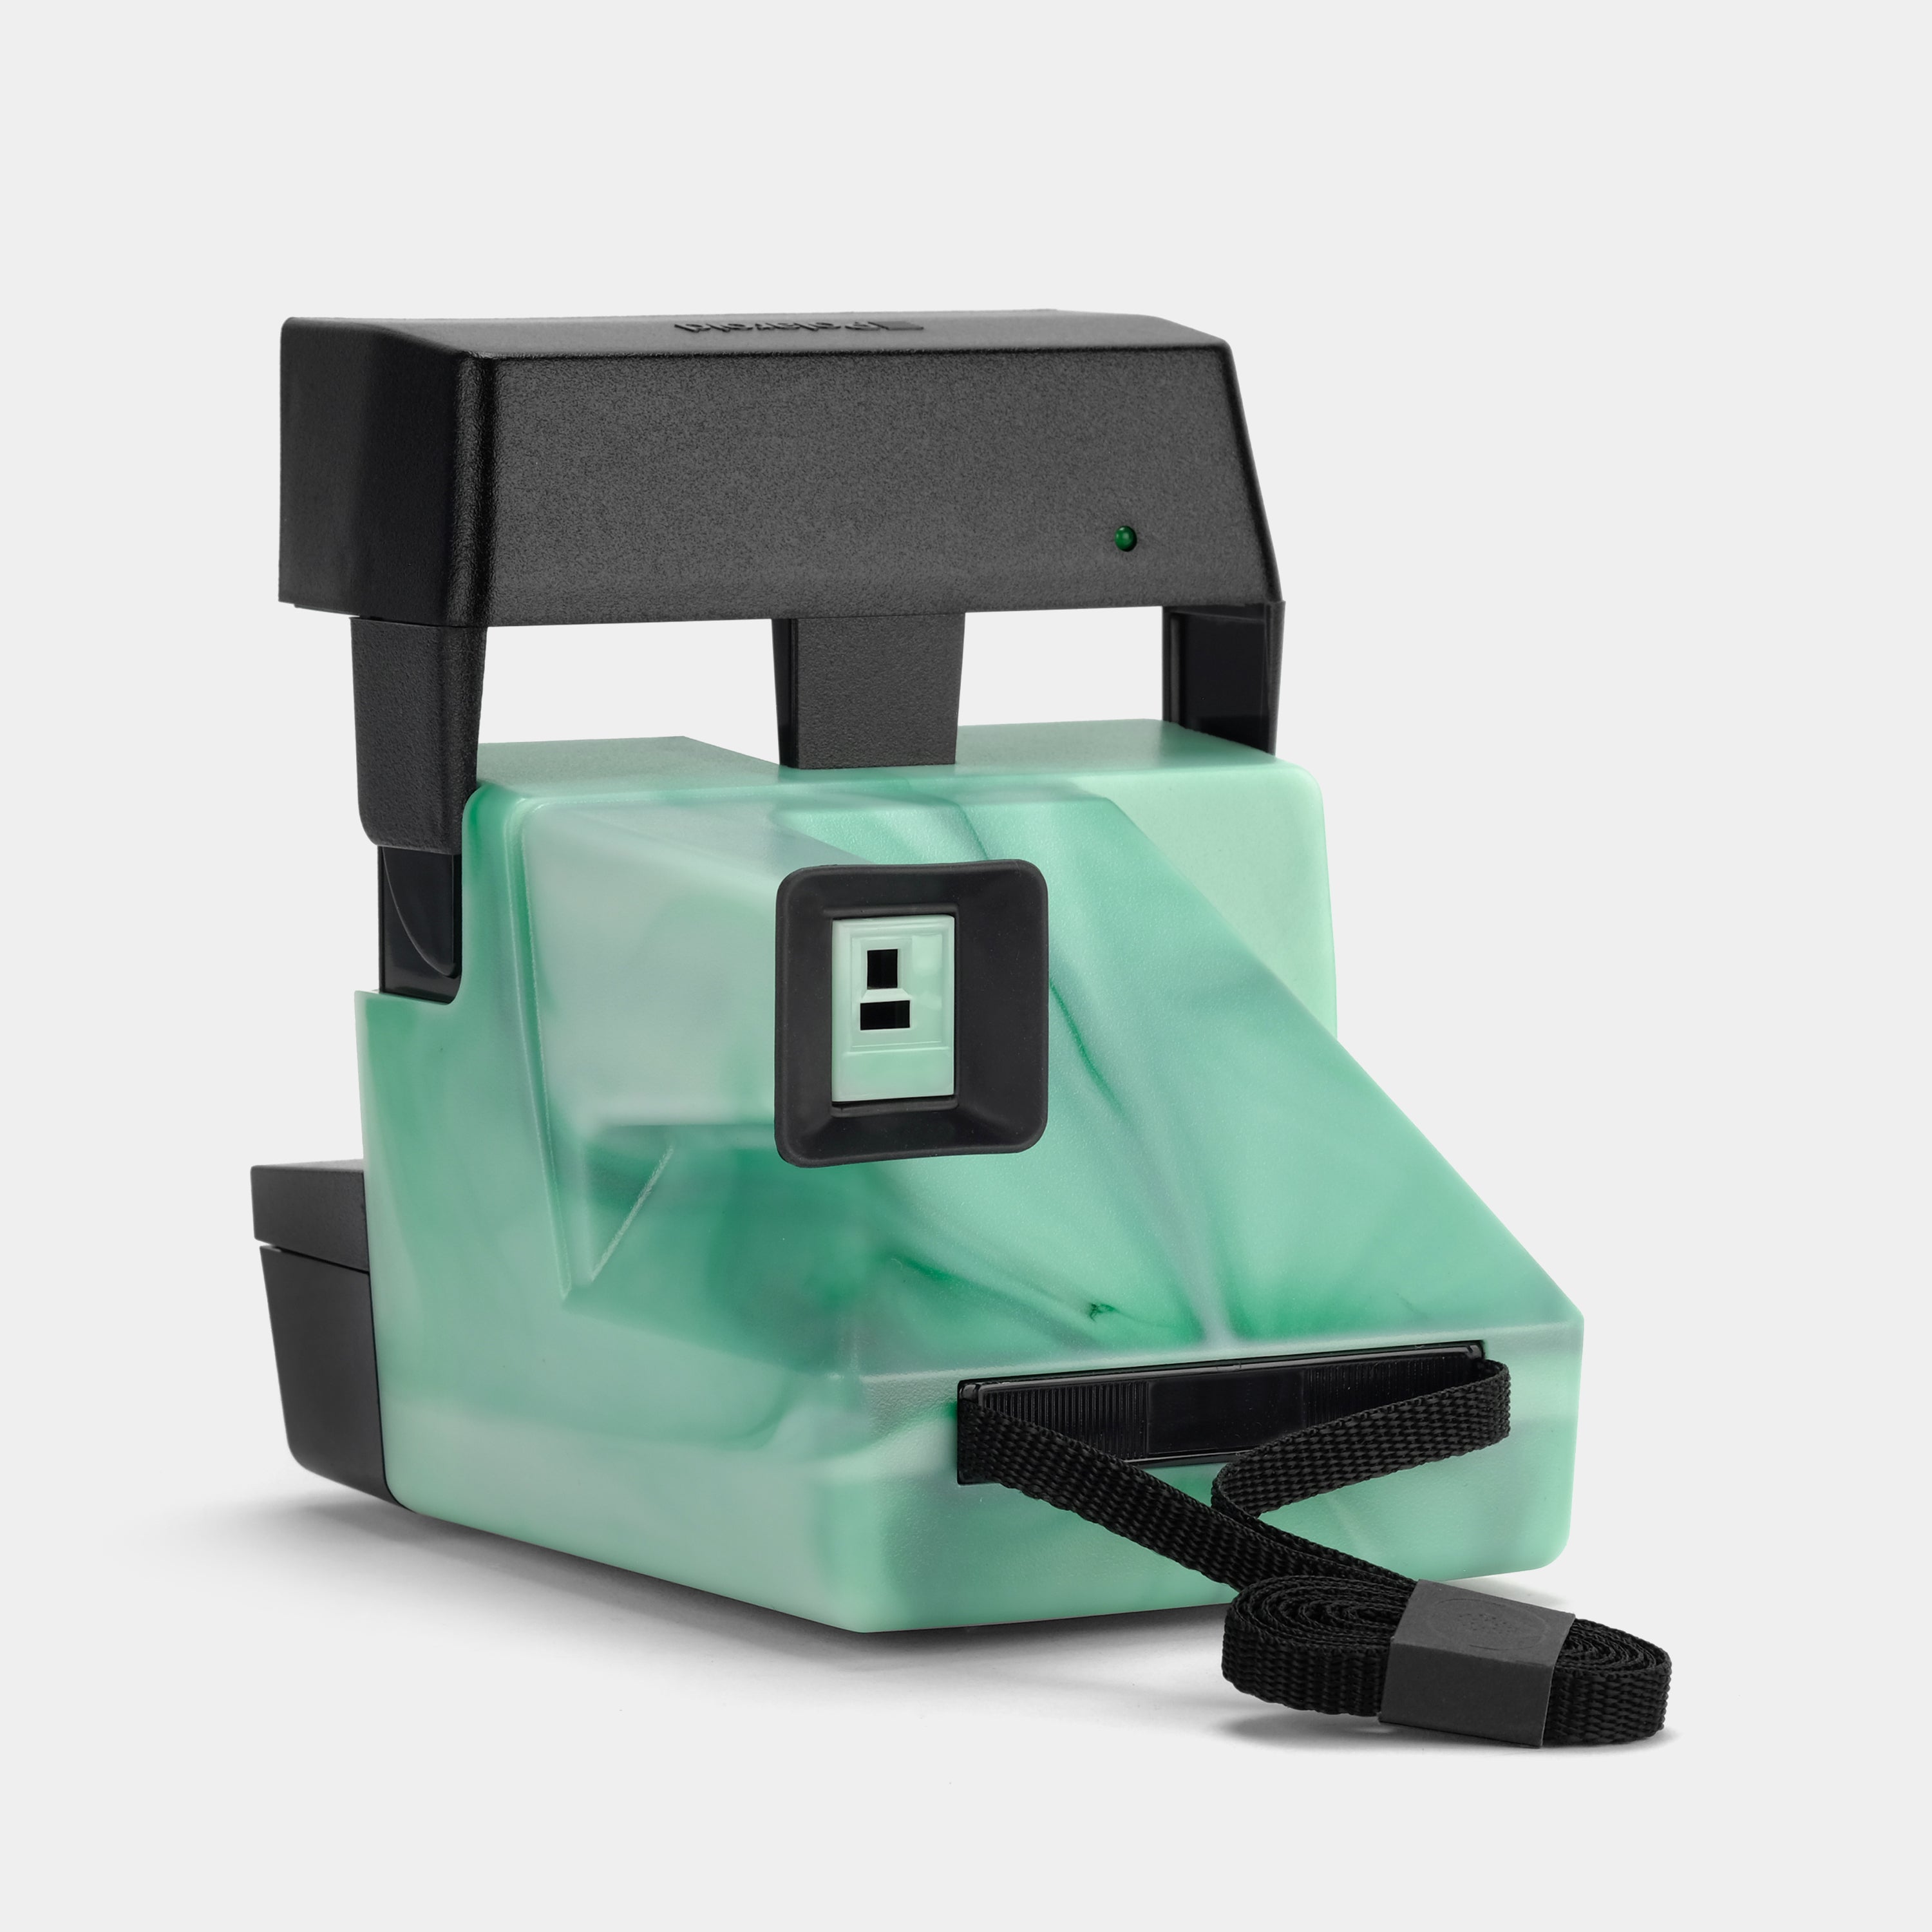 Teal and Black Swirl 600 Instant Film Camera